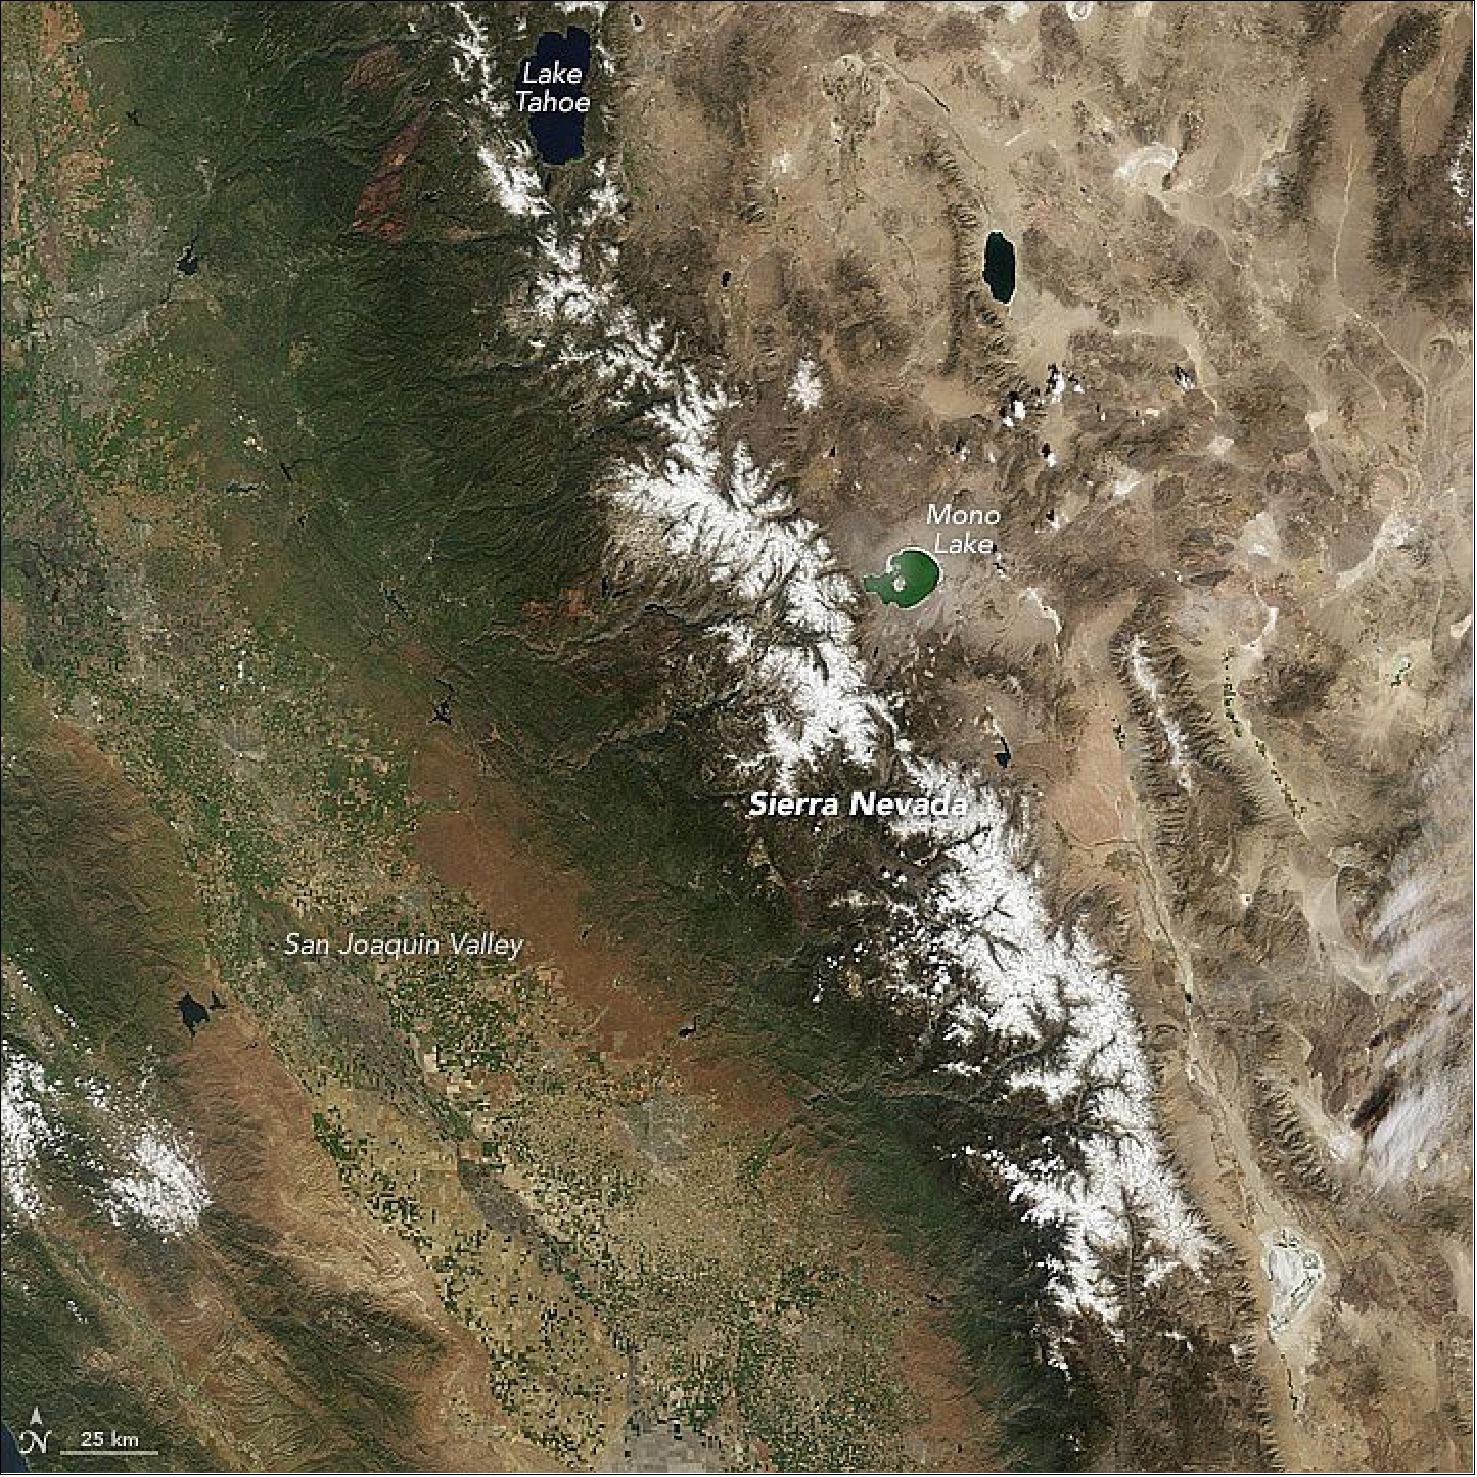 Figure 98: The snowpack on the Sierra Nevada amid the dry year of 2015, acquired by the MODIS instrument on Terra on March 31, 2015 (image credit: NASA, Earth Observatory, jesse Allen)